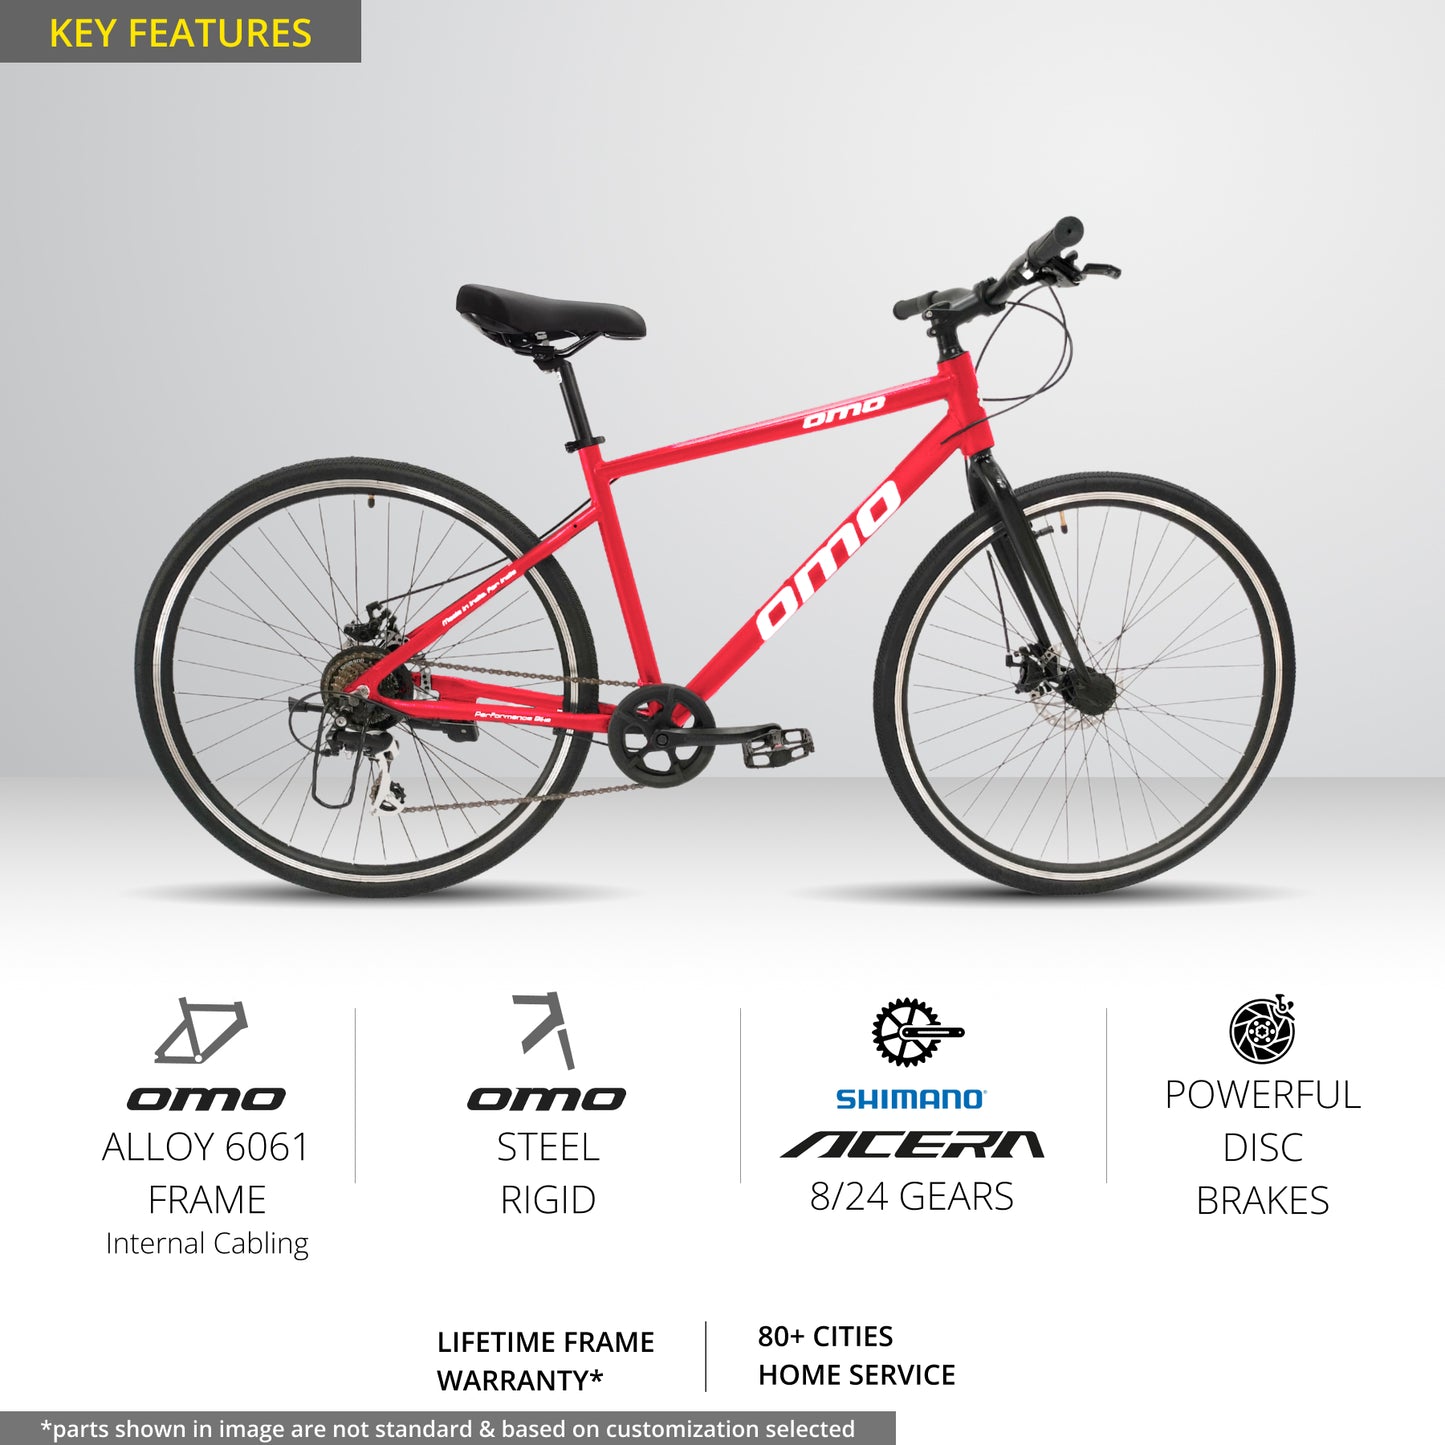 Omobikes alloy frame hampi geared hybrid bike under 20000 feature points